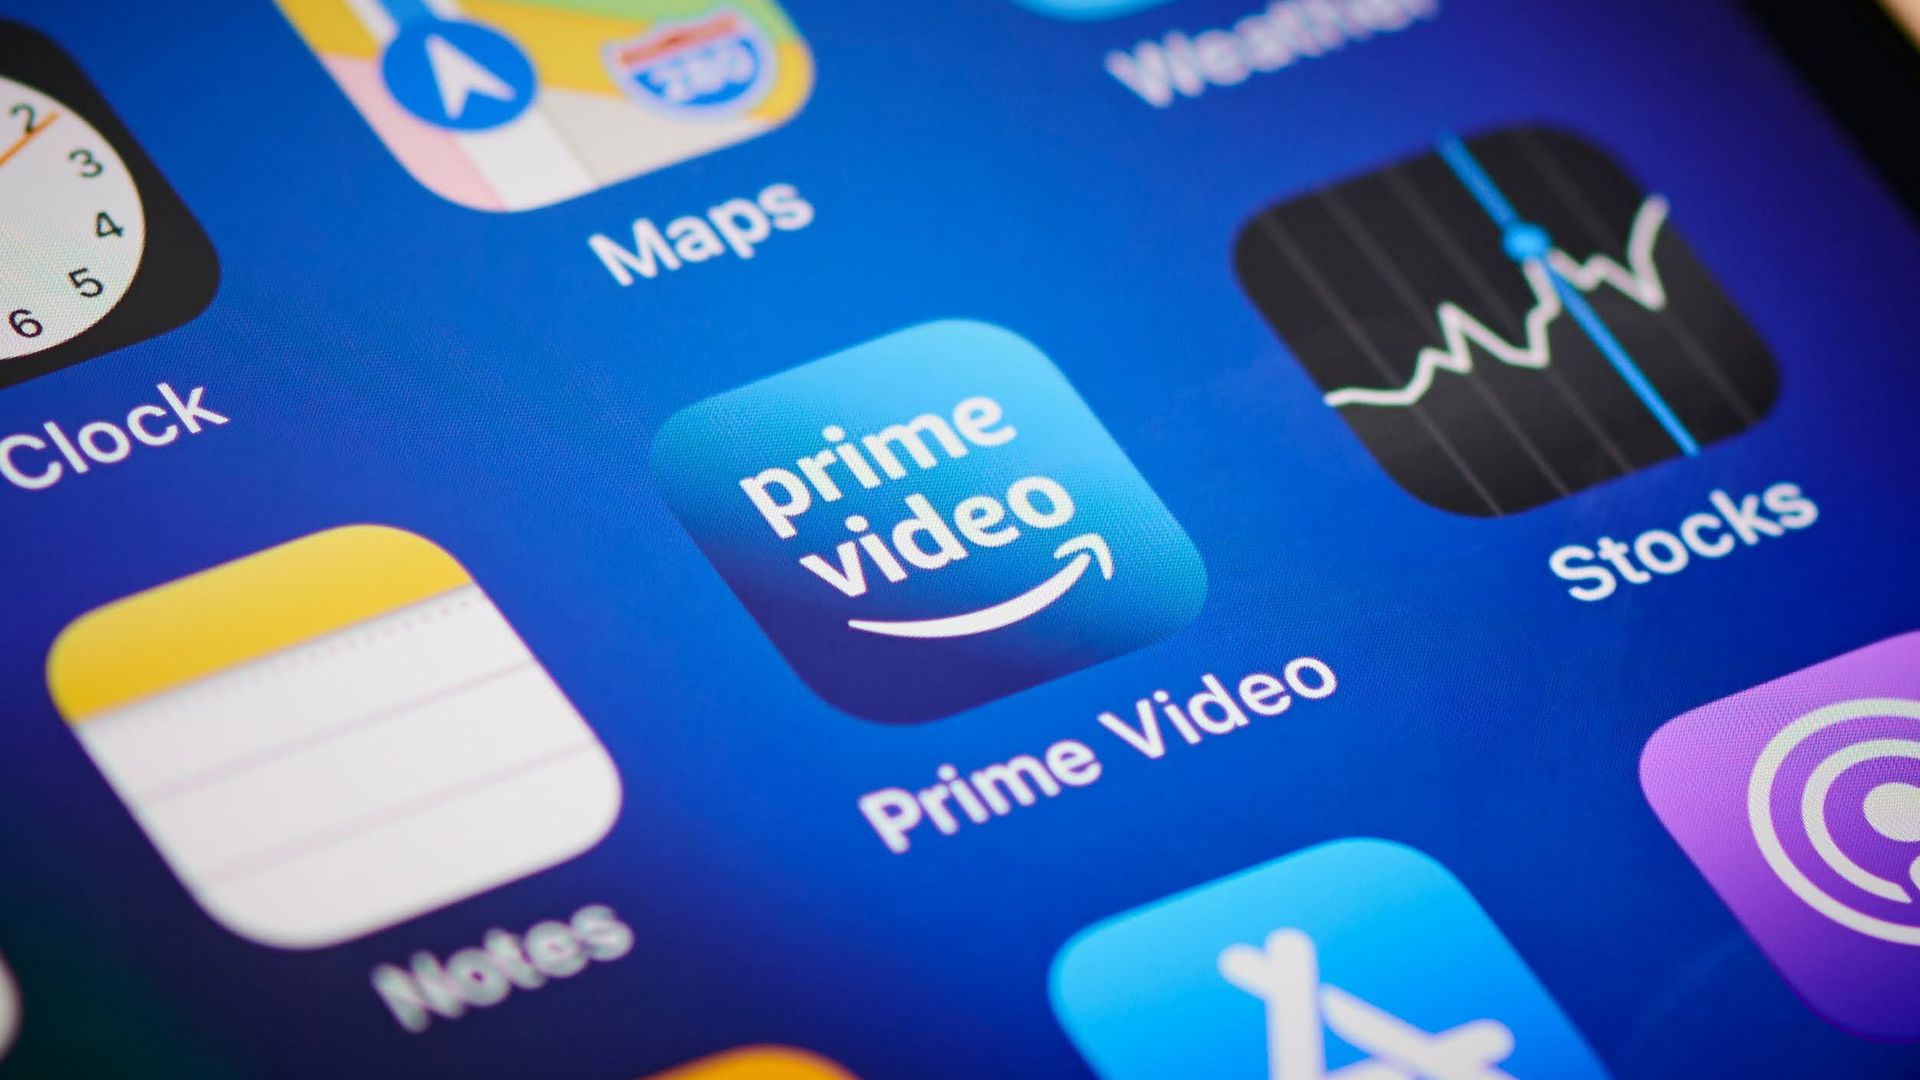 Starting on September 15, users in Europe will experience an Amazon Prime price increase.